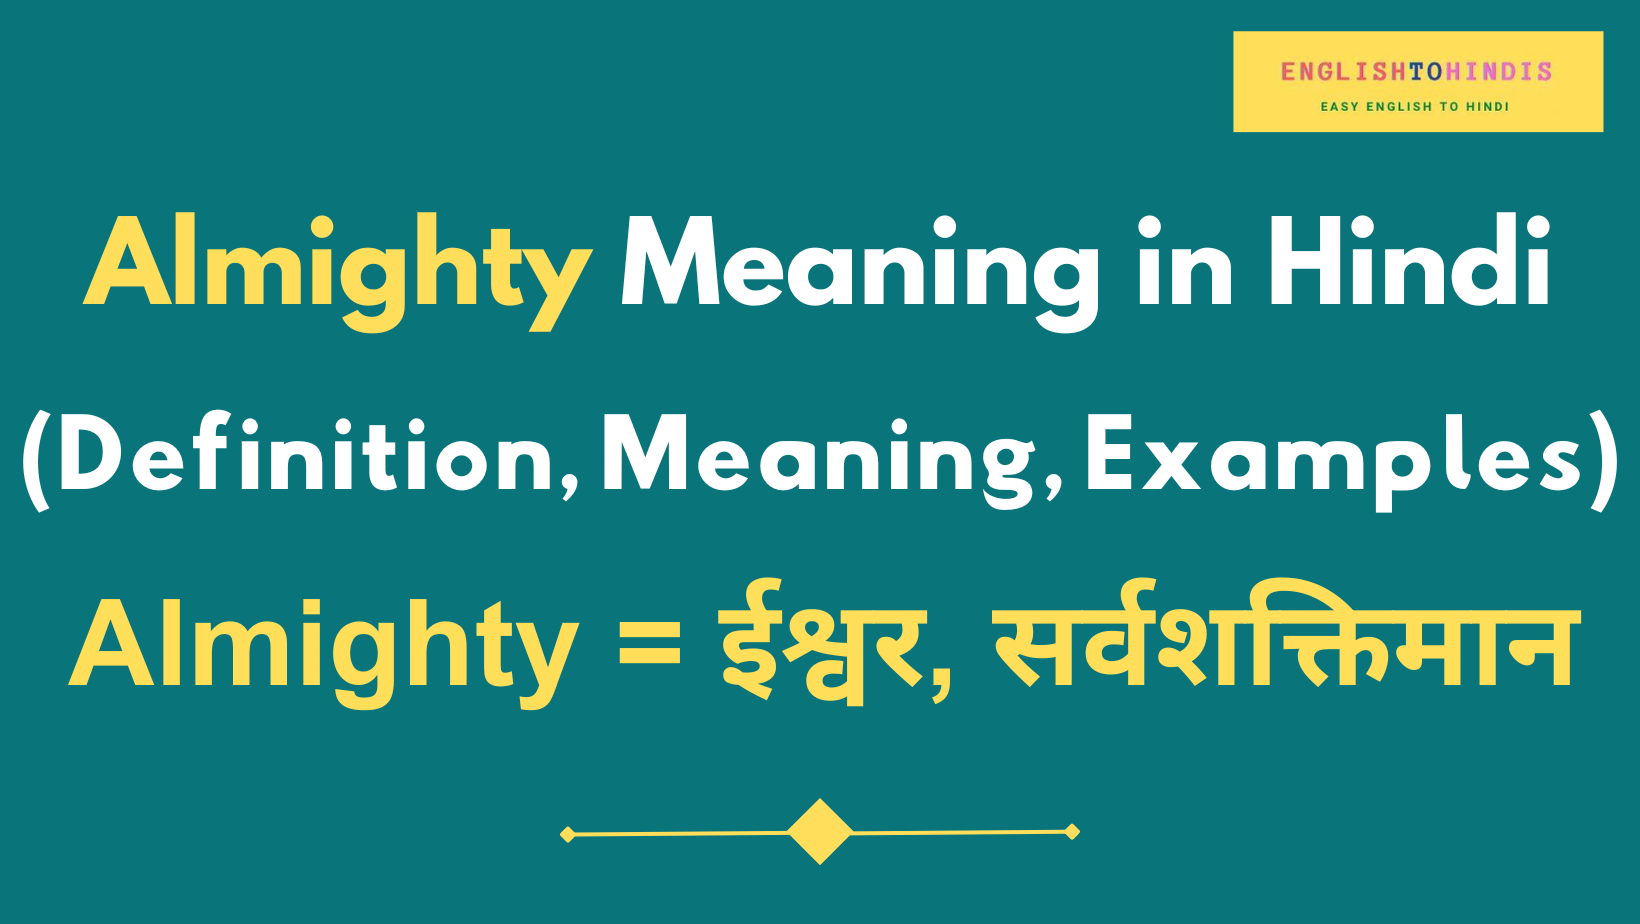 Almighty Meaning in Hindi